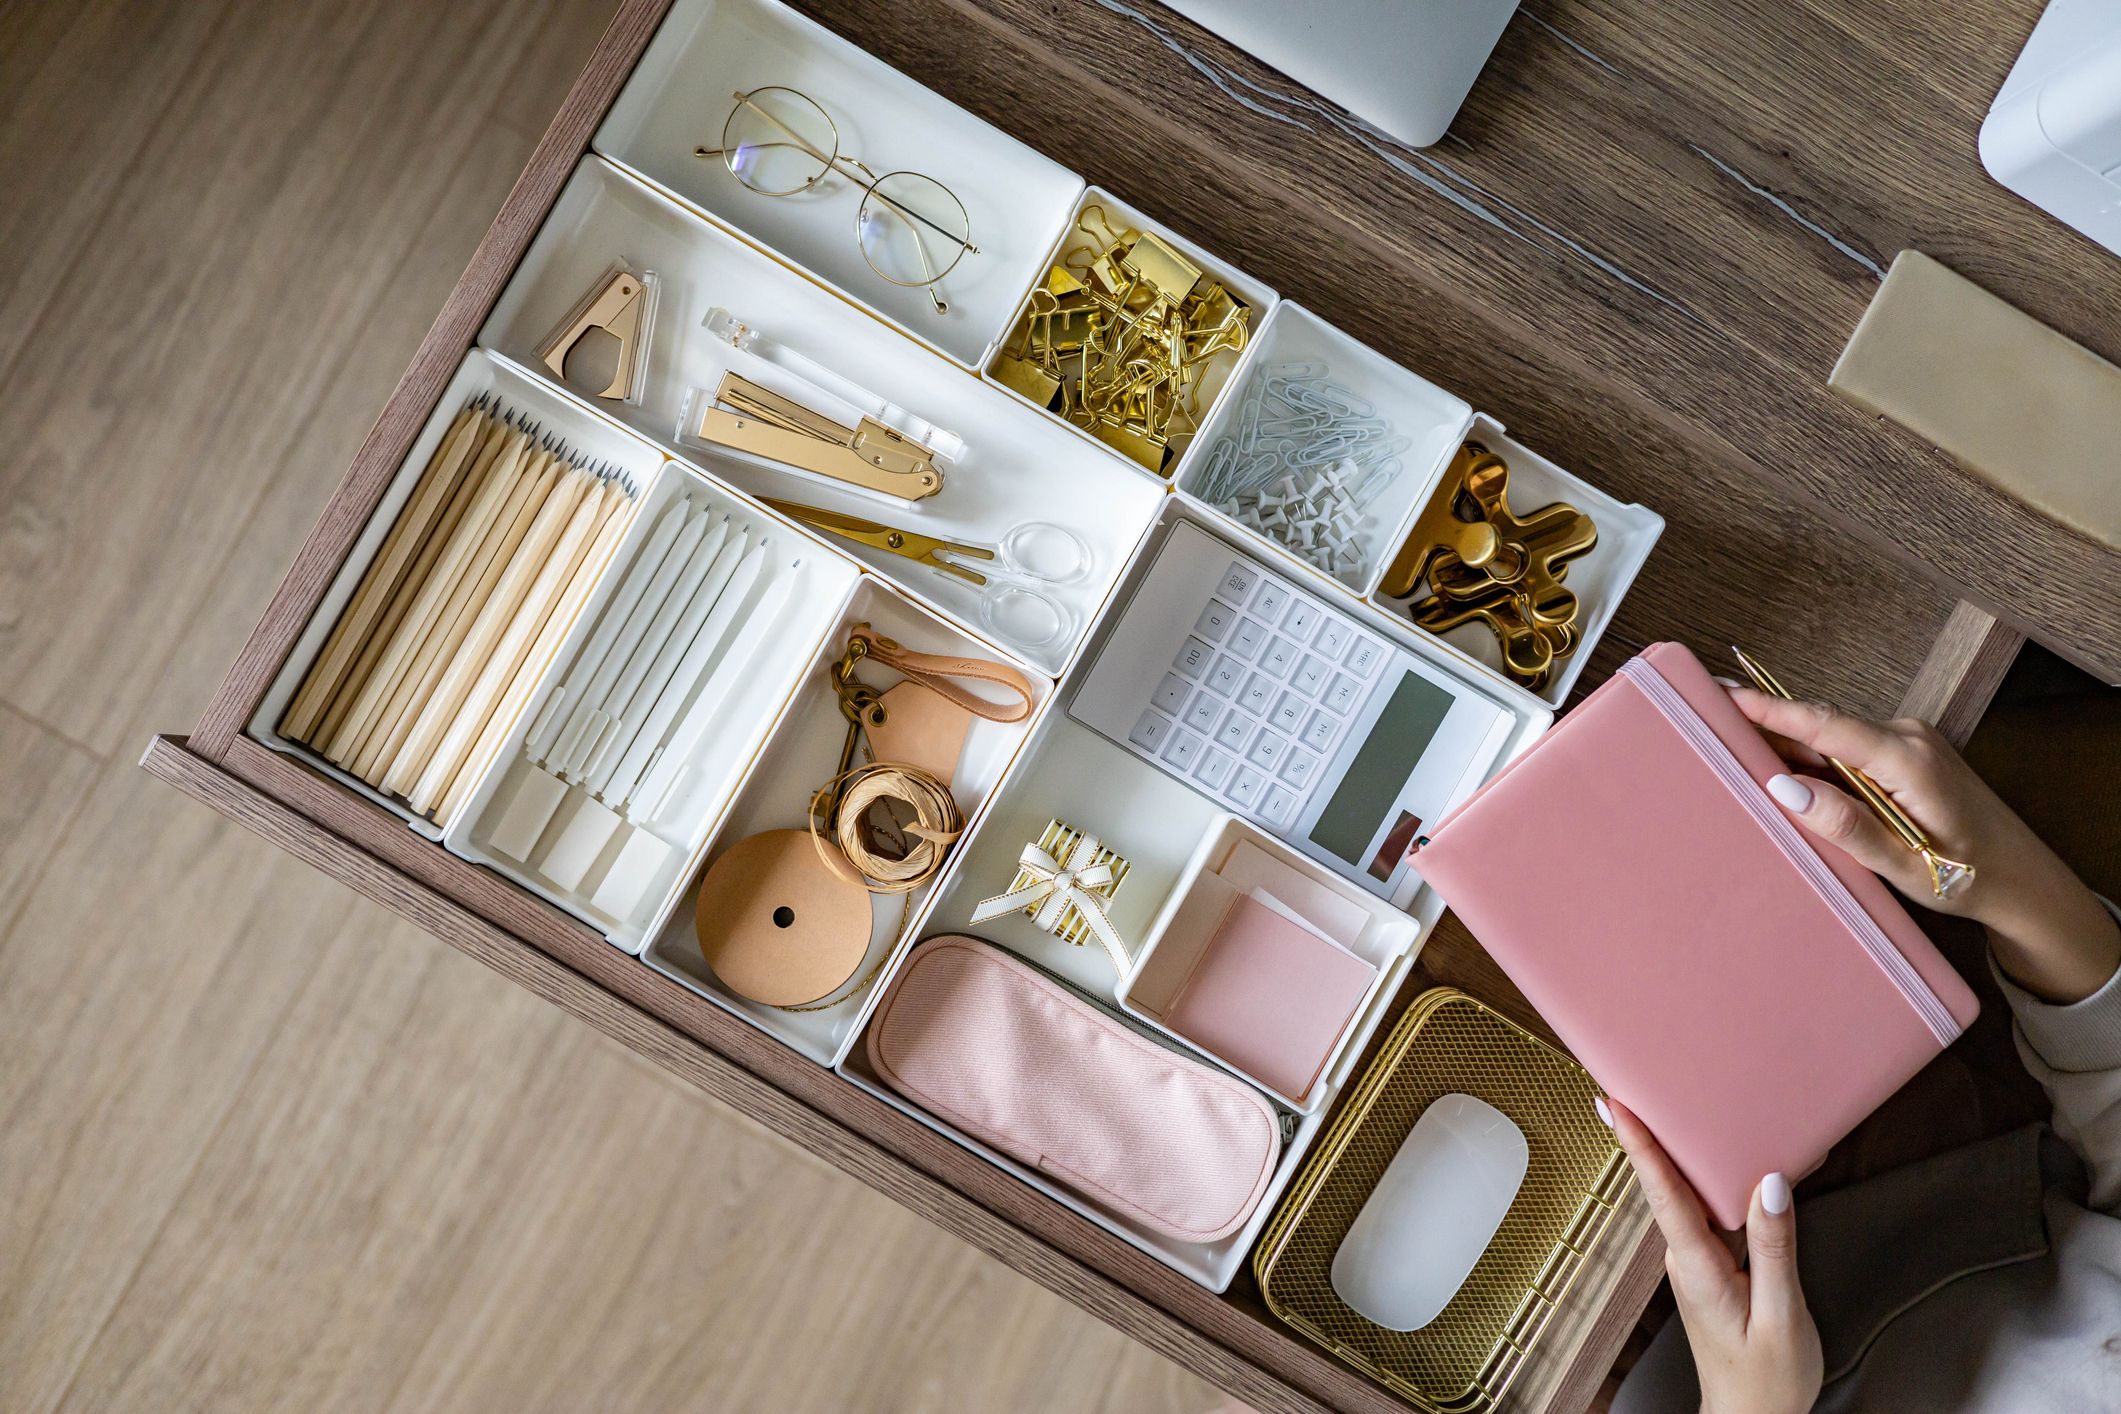 Drawer organisers: How to organise your drawers properly